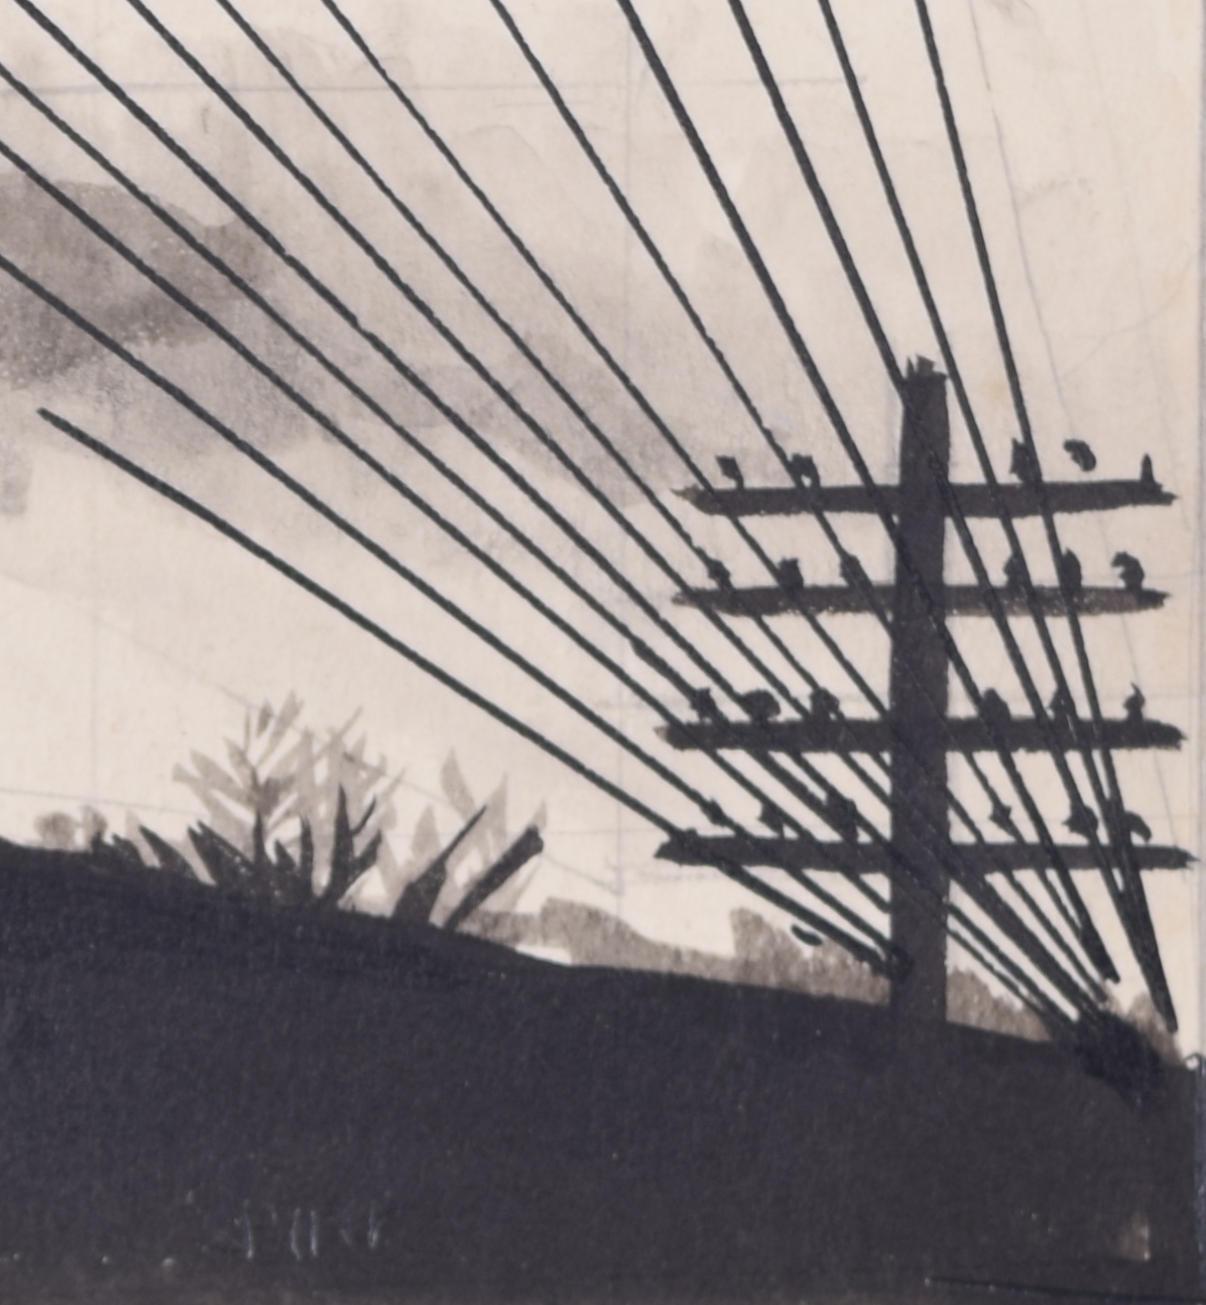 Telegraph wires and poles watercolour and pencil drawing by Gerald Mac Spink 2